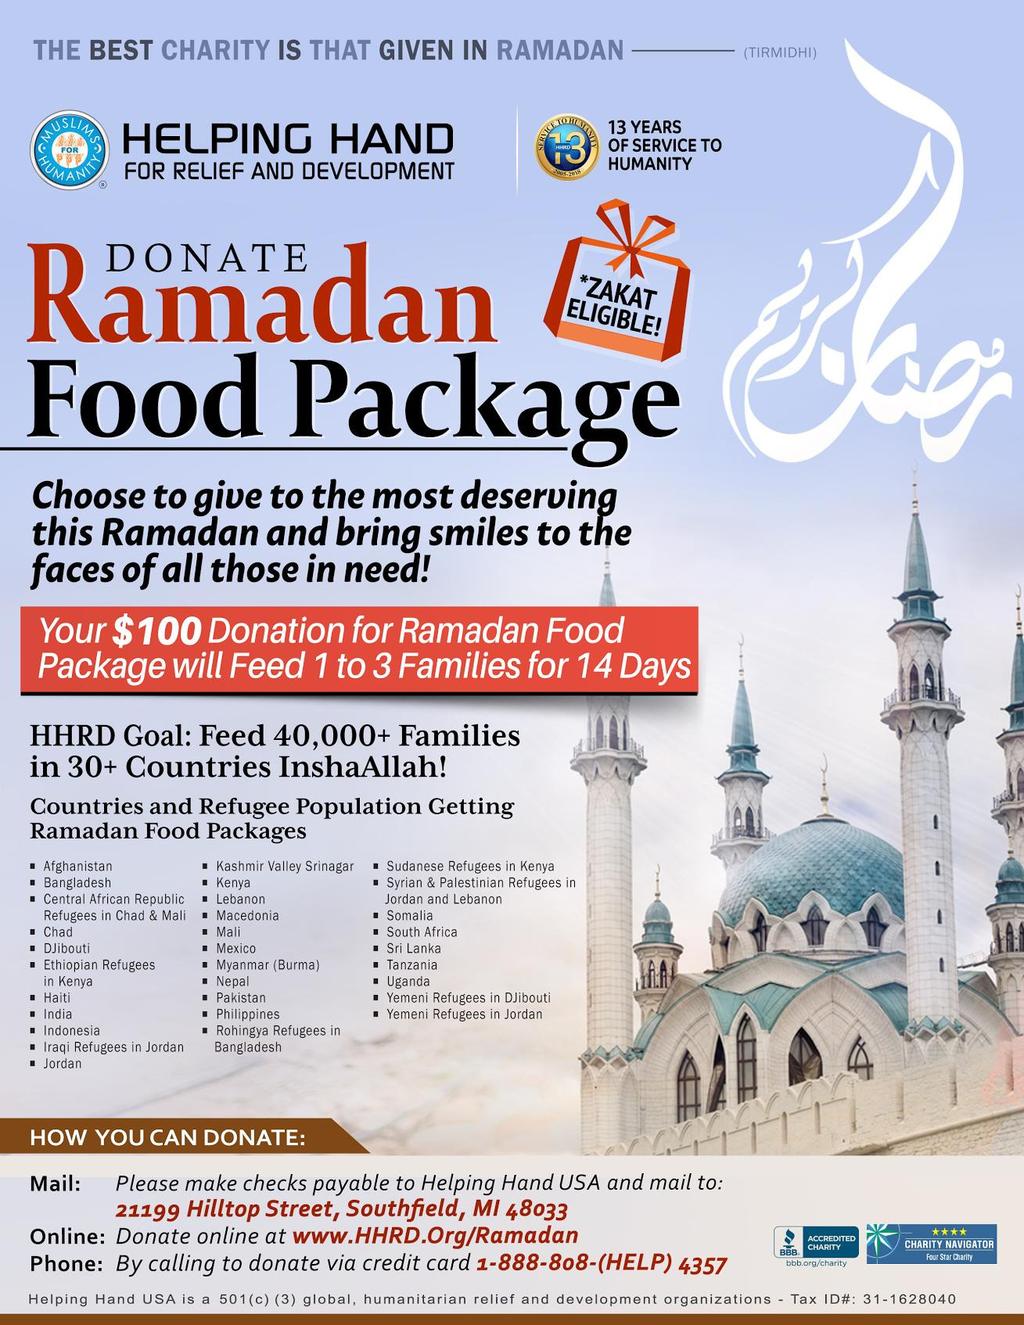 How you can donate: Visit the HHRD booth during Jumuaa & Taraweeh prayers For